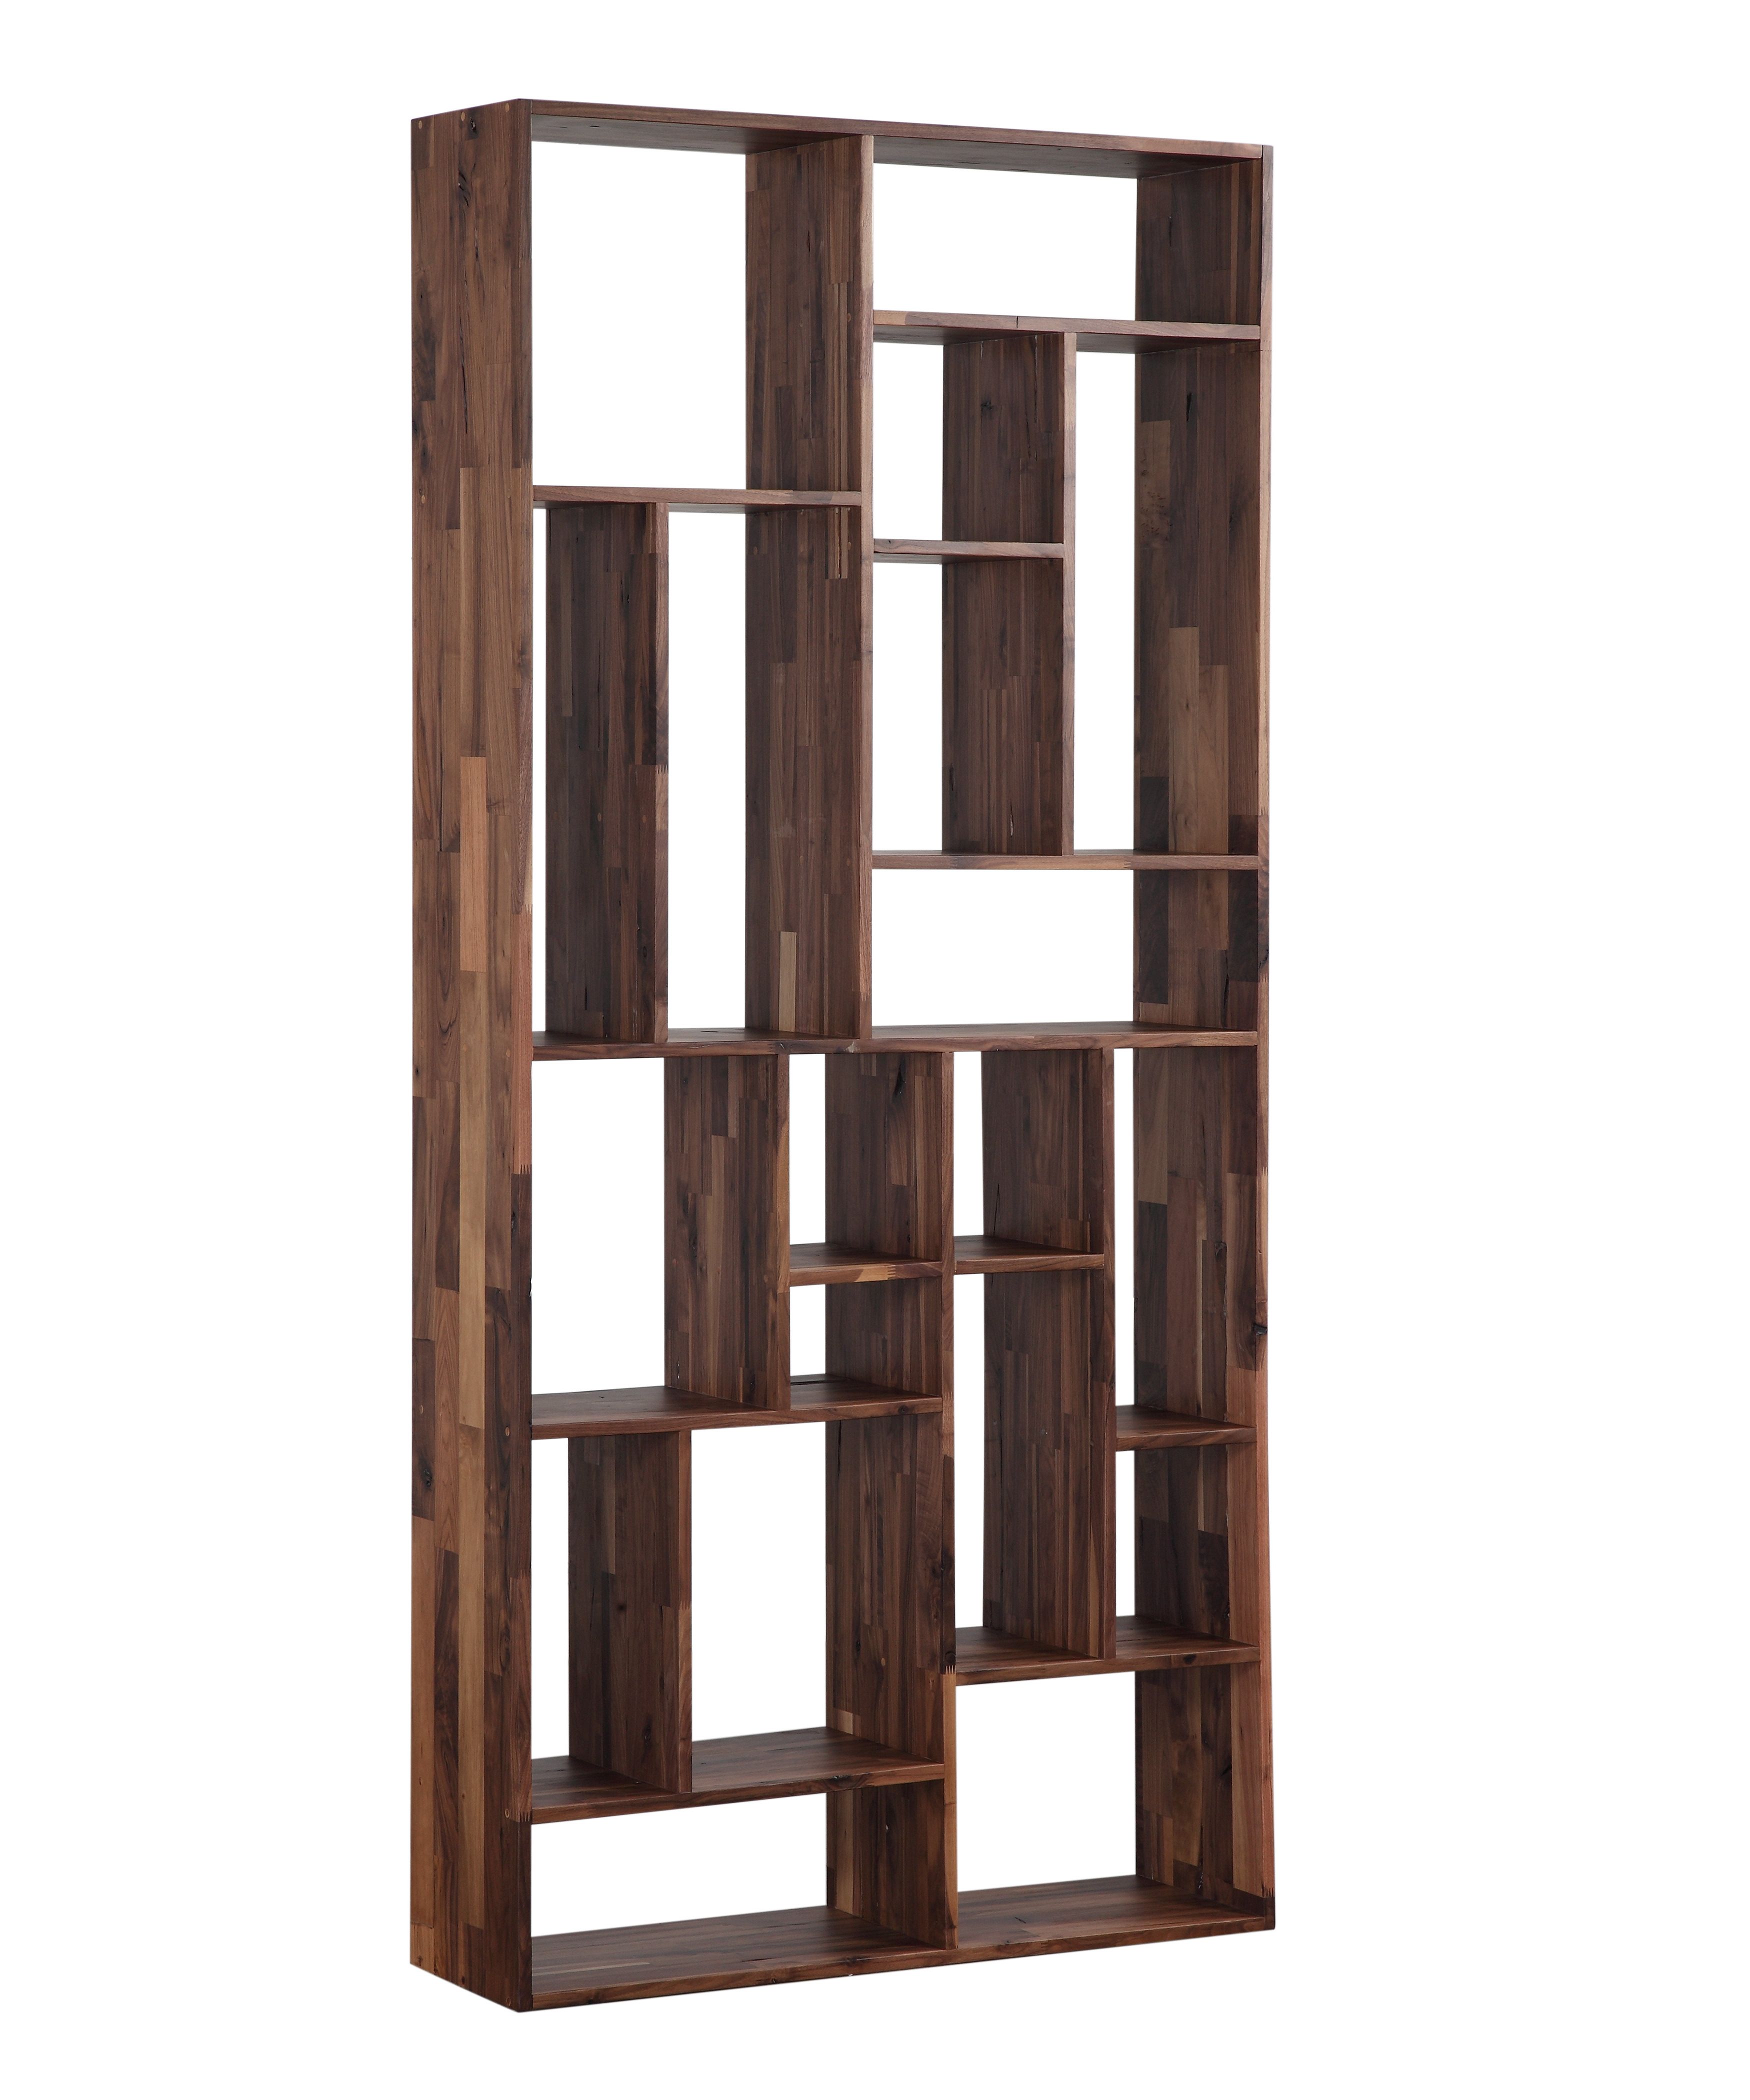 Blevens Geometric Bookcase Throughout Fashionable Mckibben Geometric Bookcases (View 12 of 20)